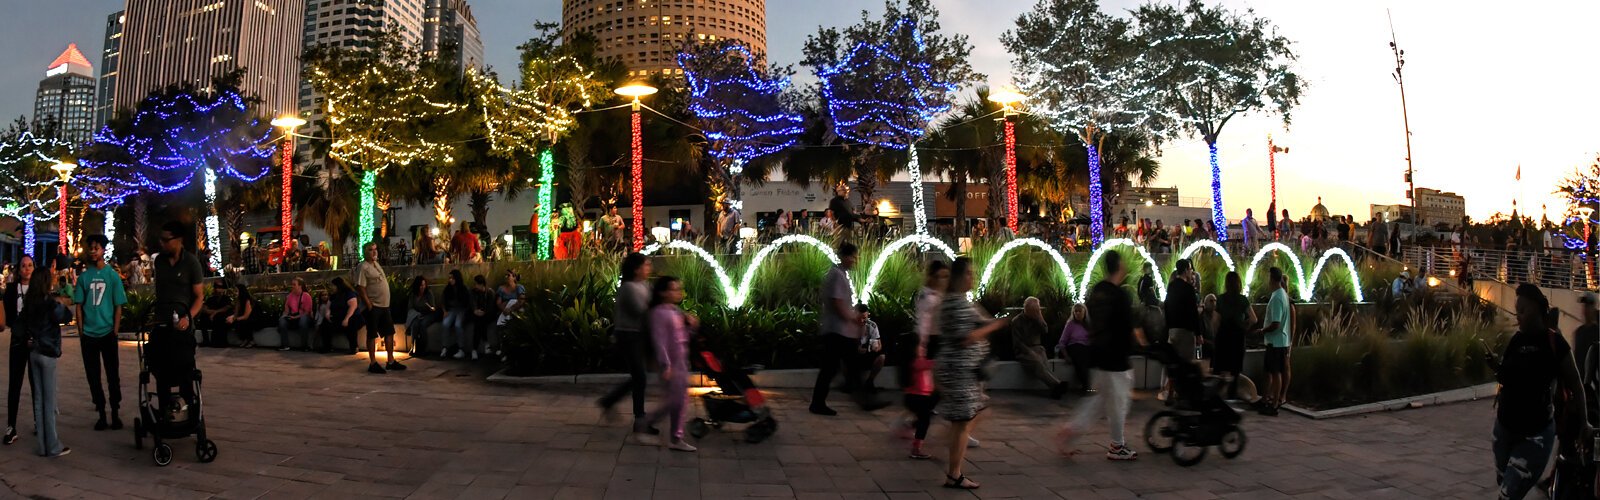 People stroll through Curtis Hixon Waterfront Park, enjoying the lights and holiday atmosphere.